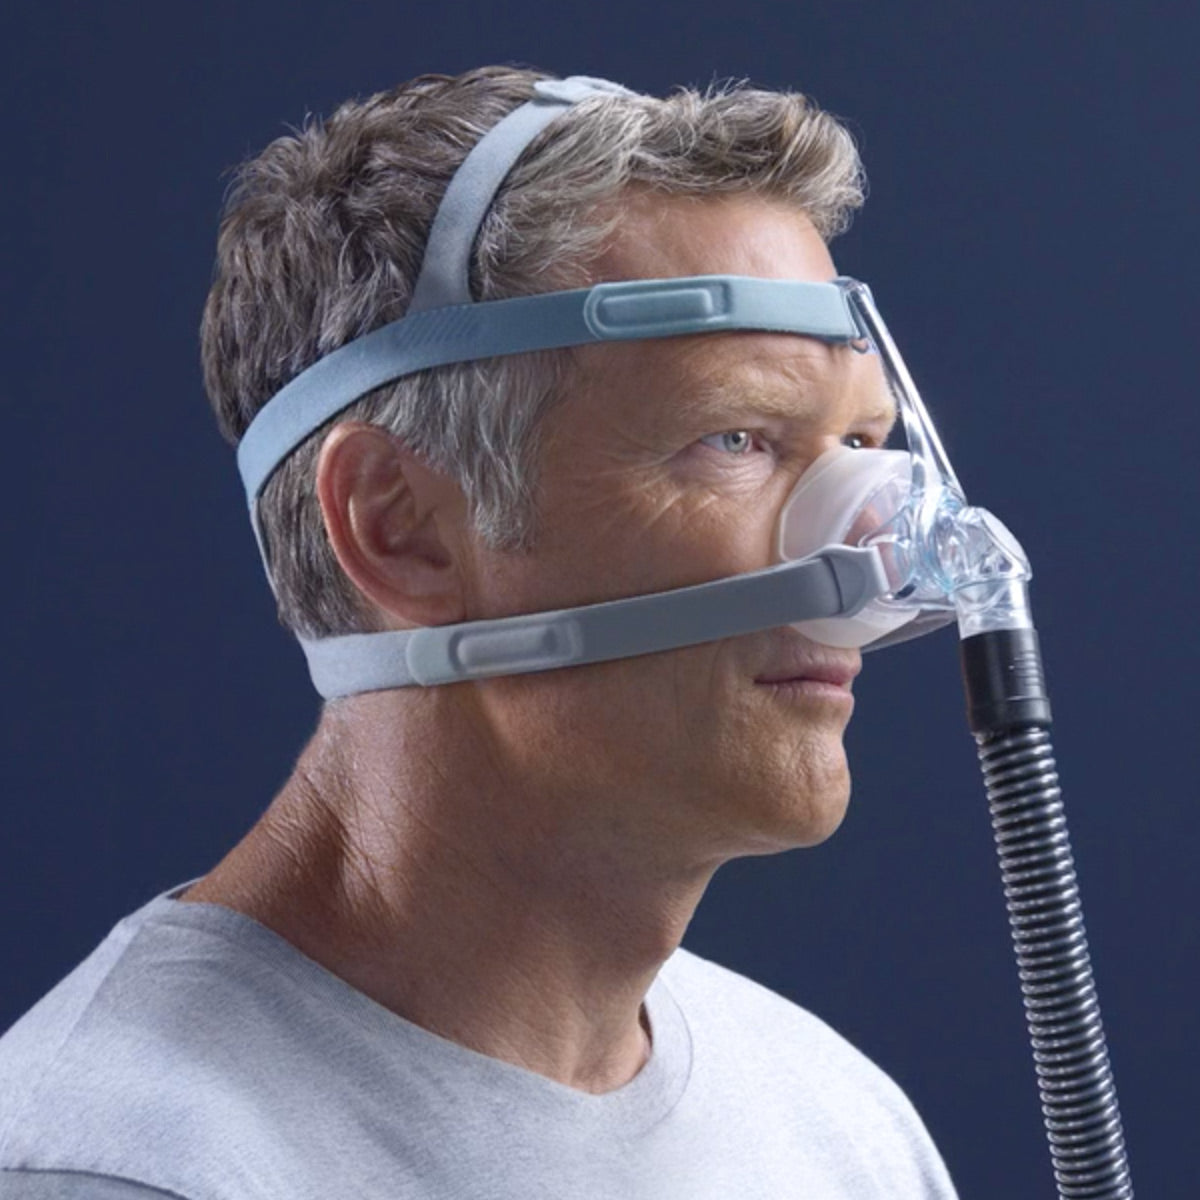 F&P Eson 2 Nasal CPAP/BiPAP Mask FitPack With Headgear